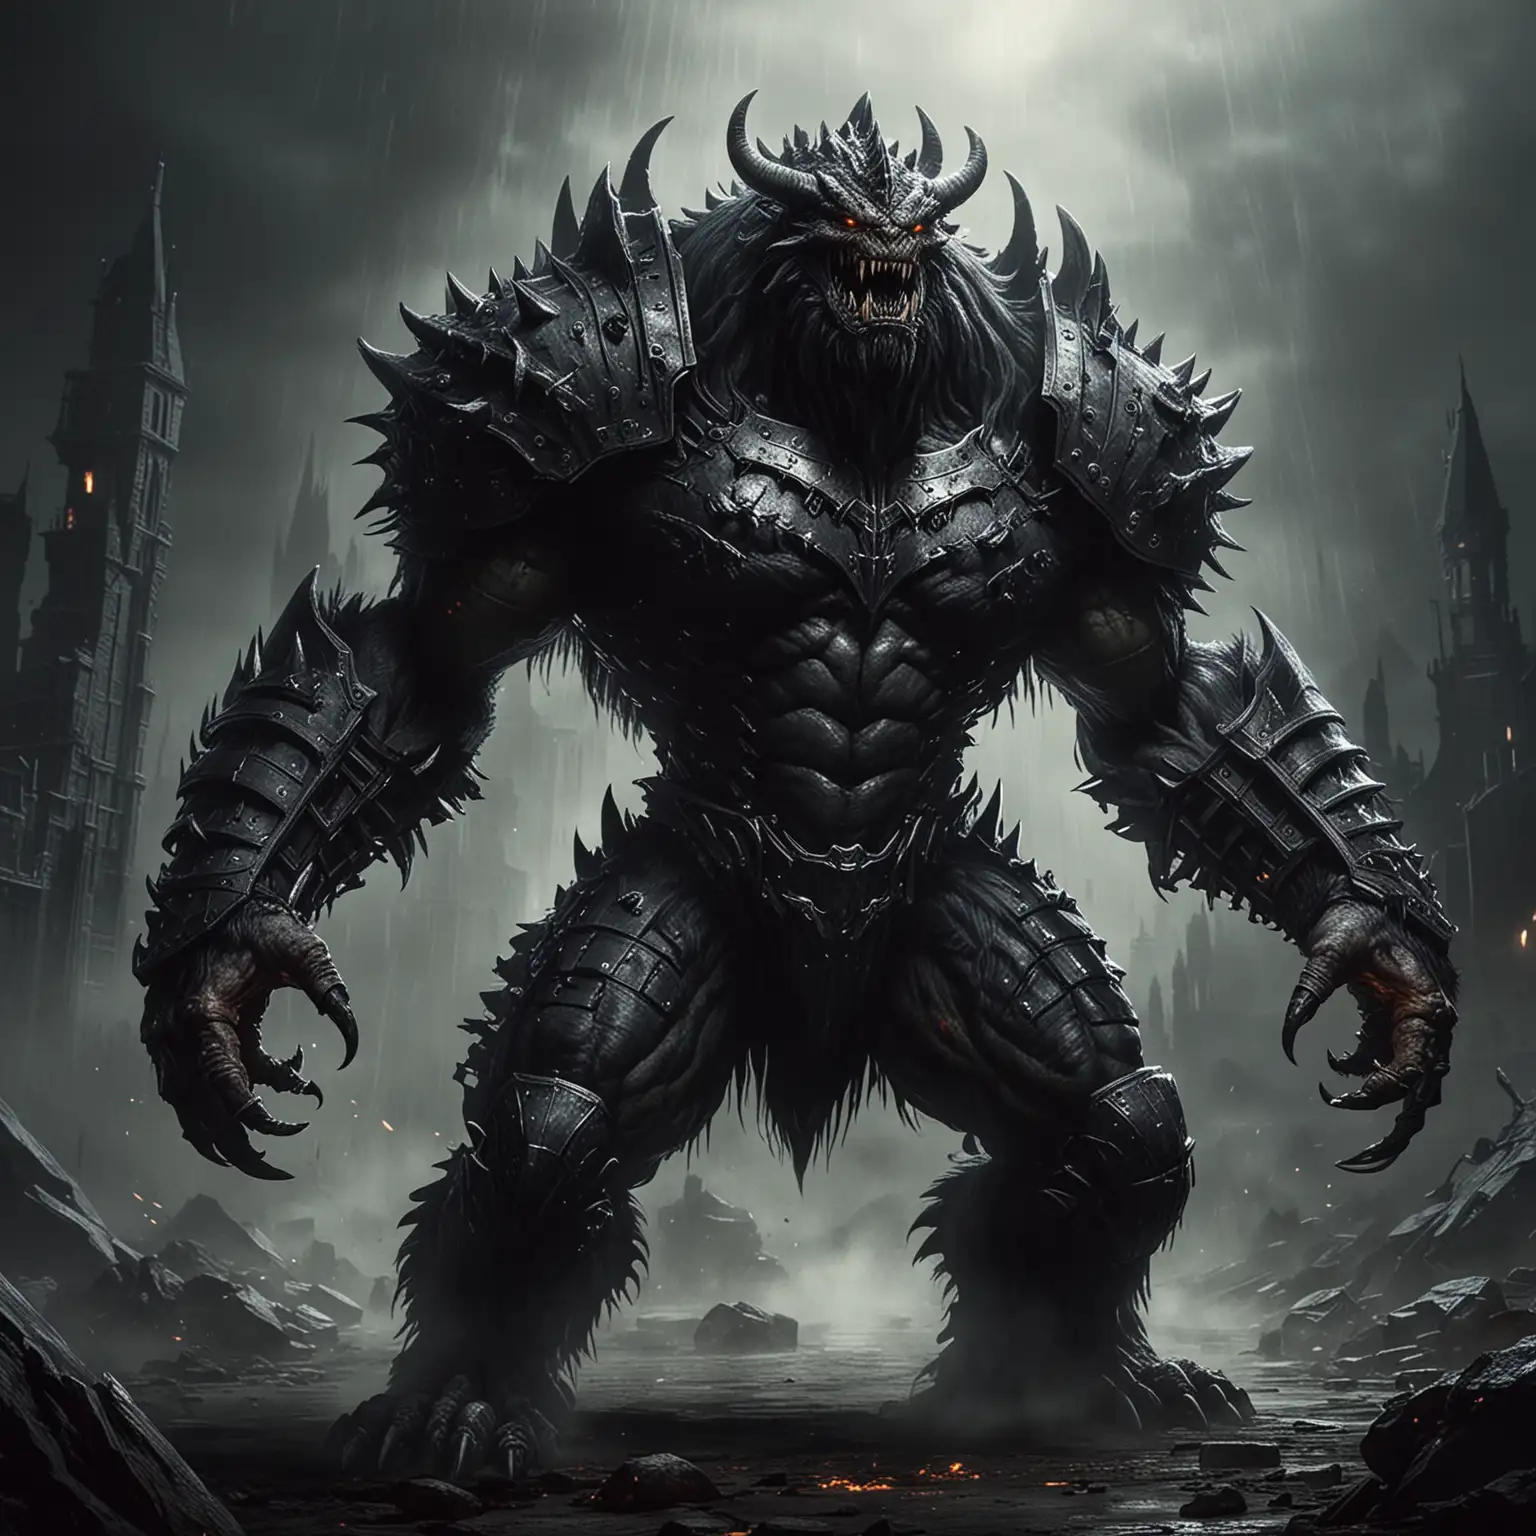 Giant Armored Monster Emerging from Darkness